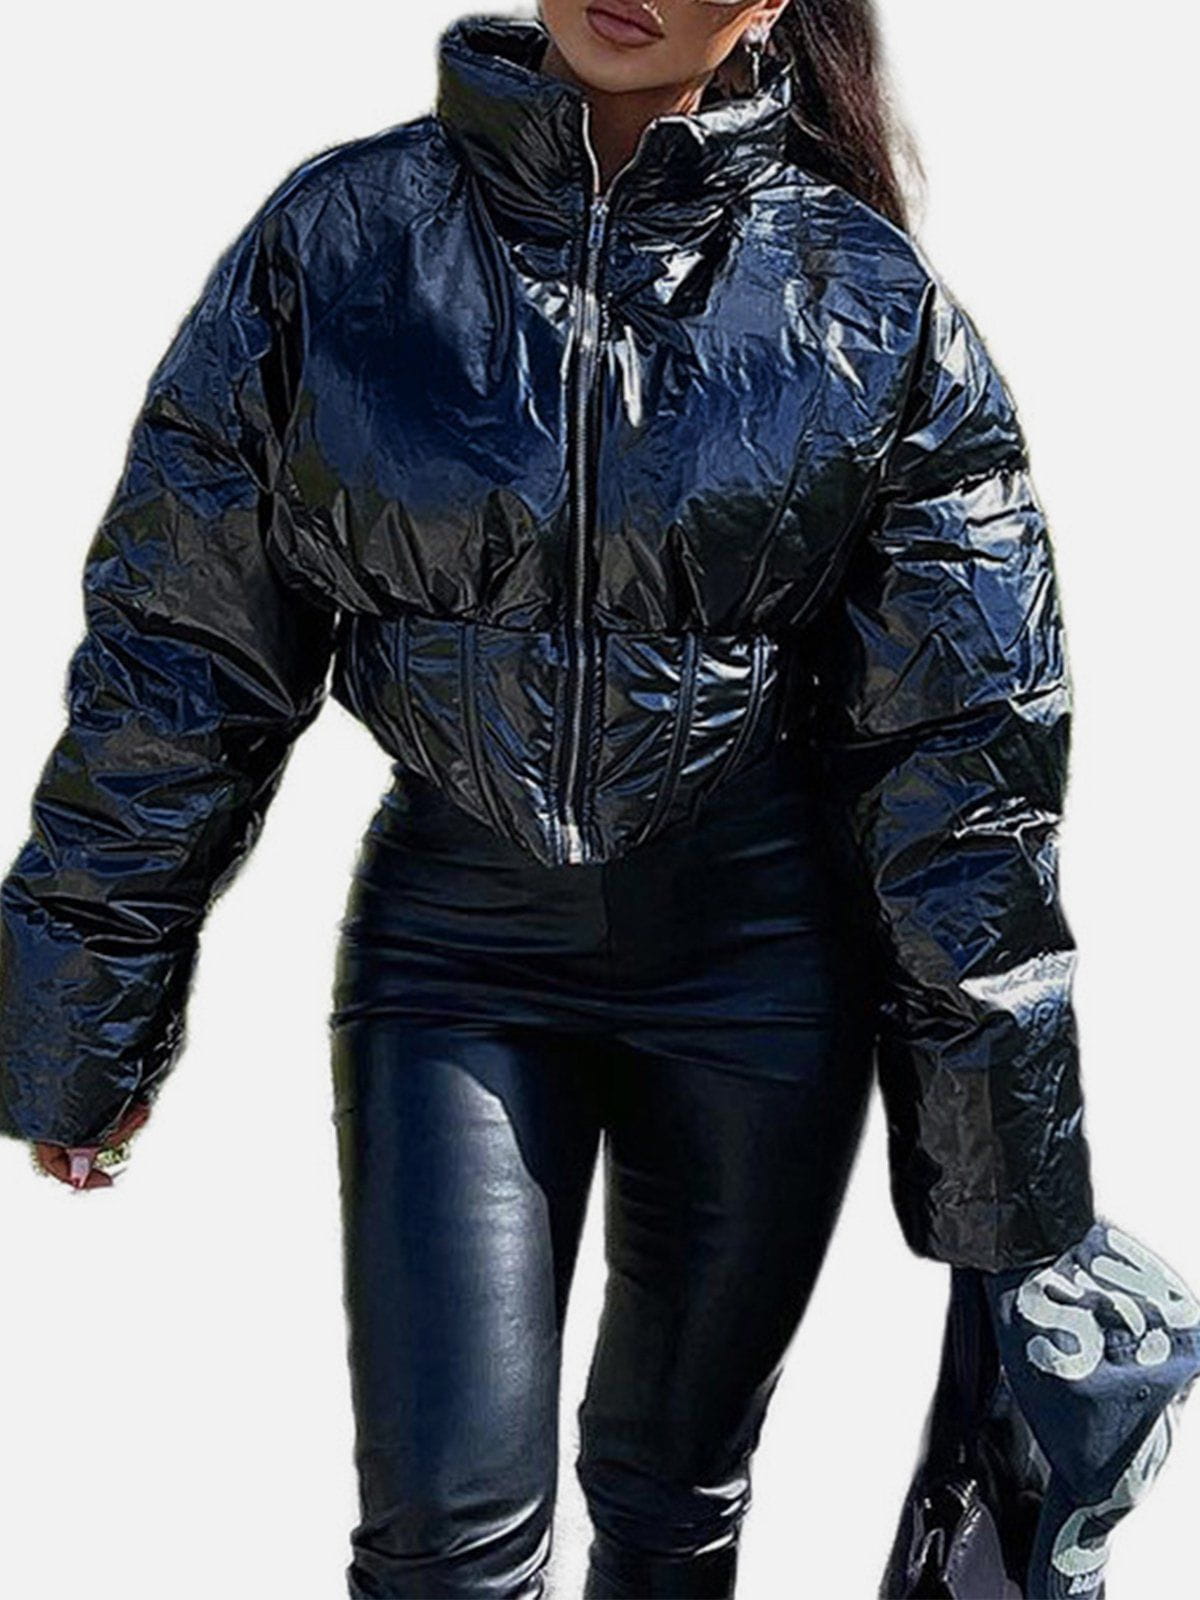 Eprezzy® - Solid Color Gloss Water Resistant Short Winter Coat Streetwear Fashion - eprezzy.com